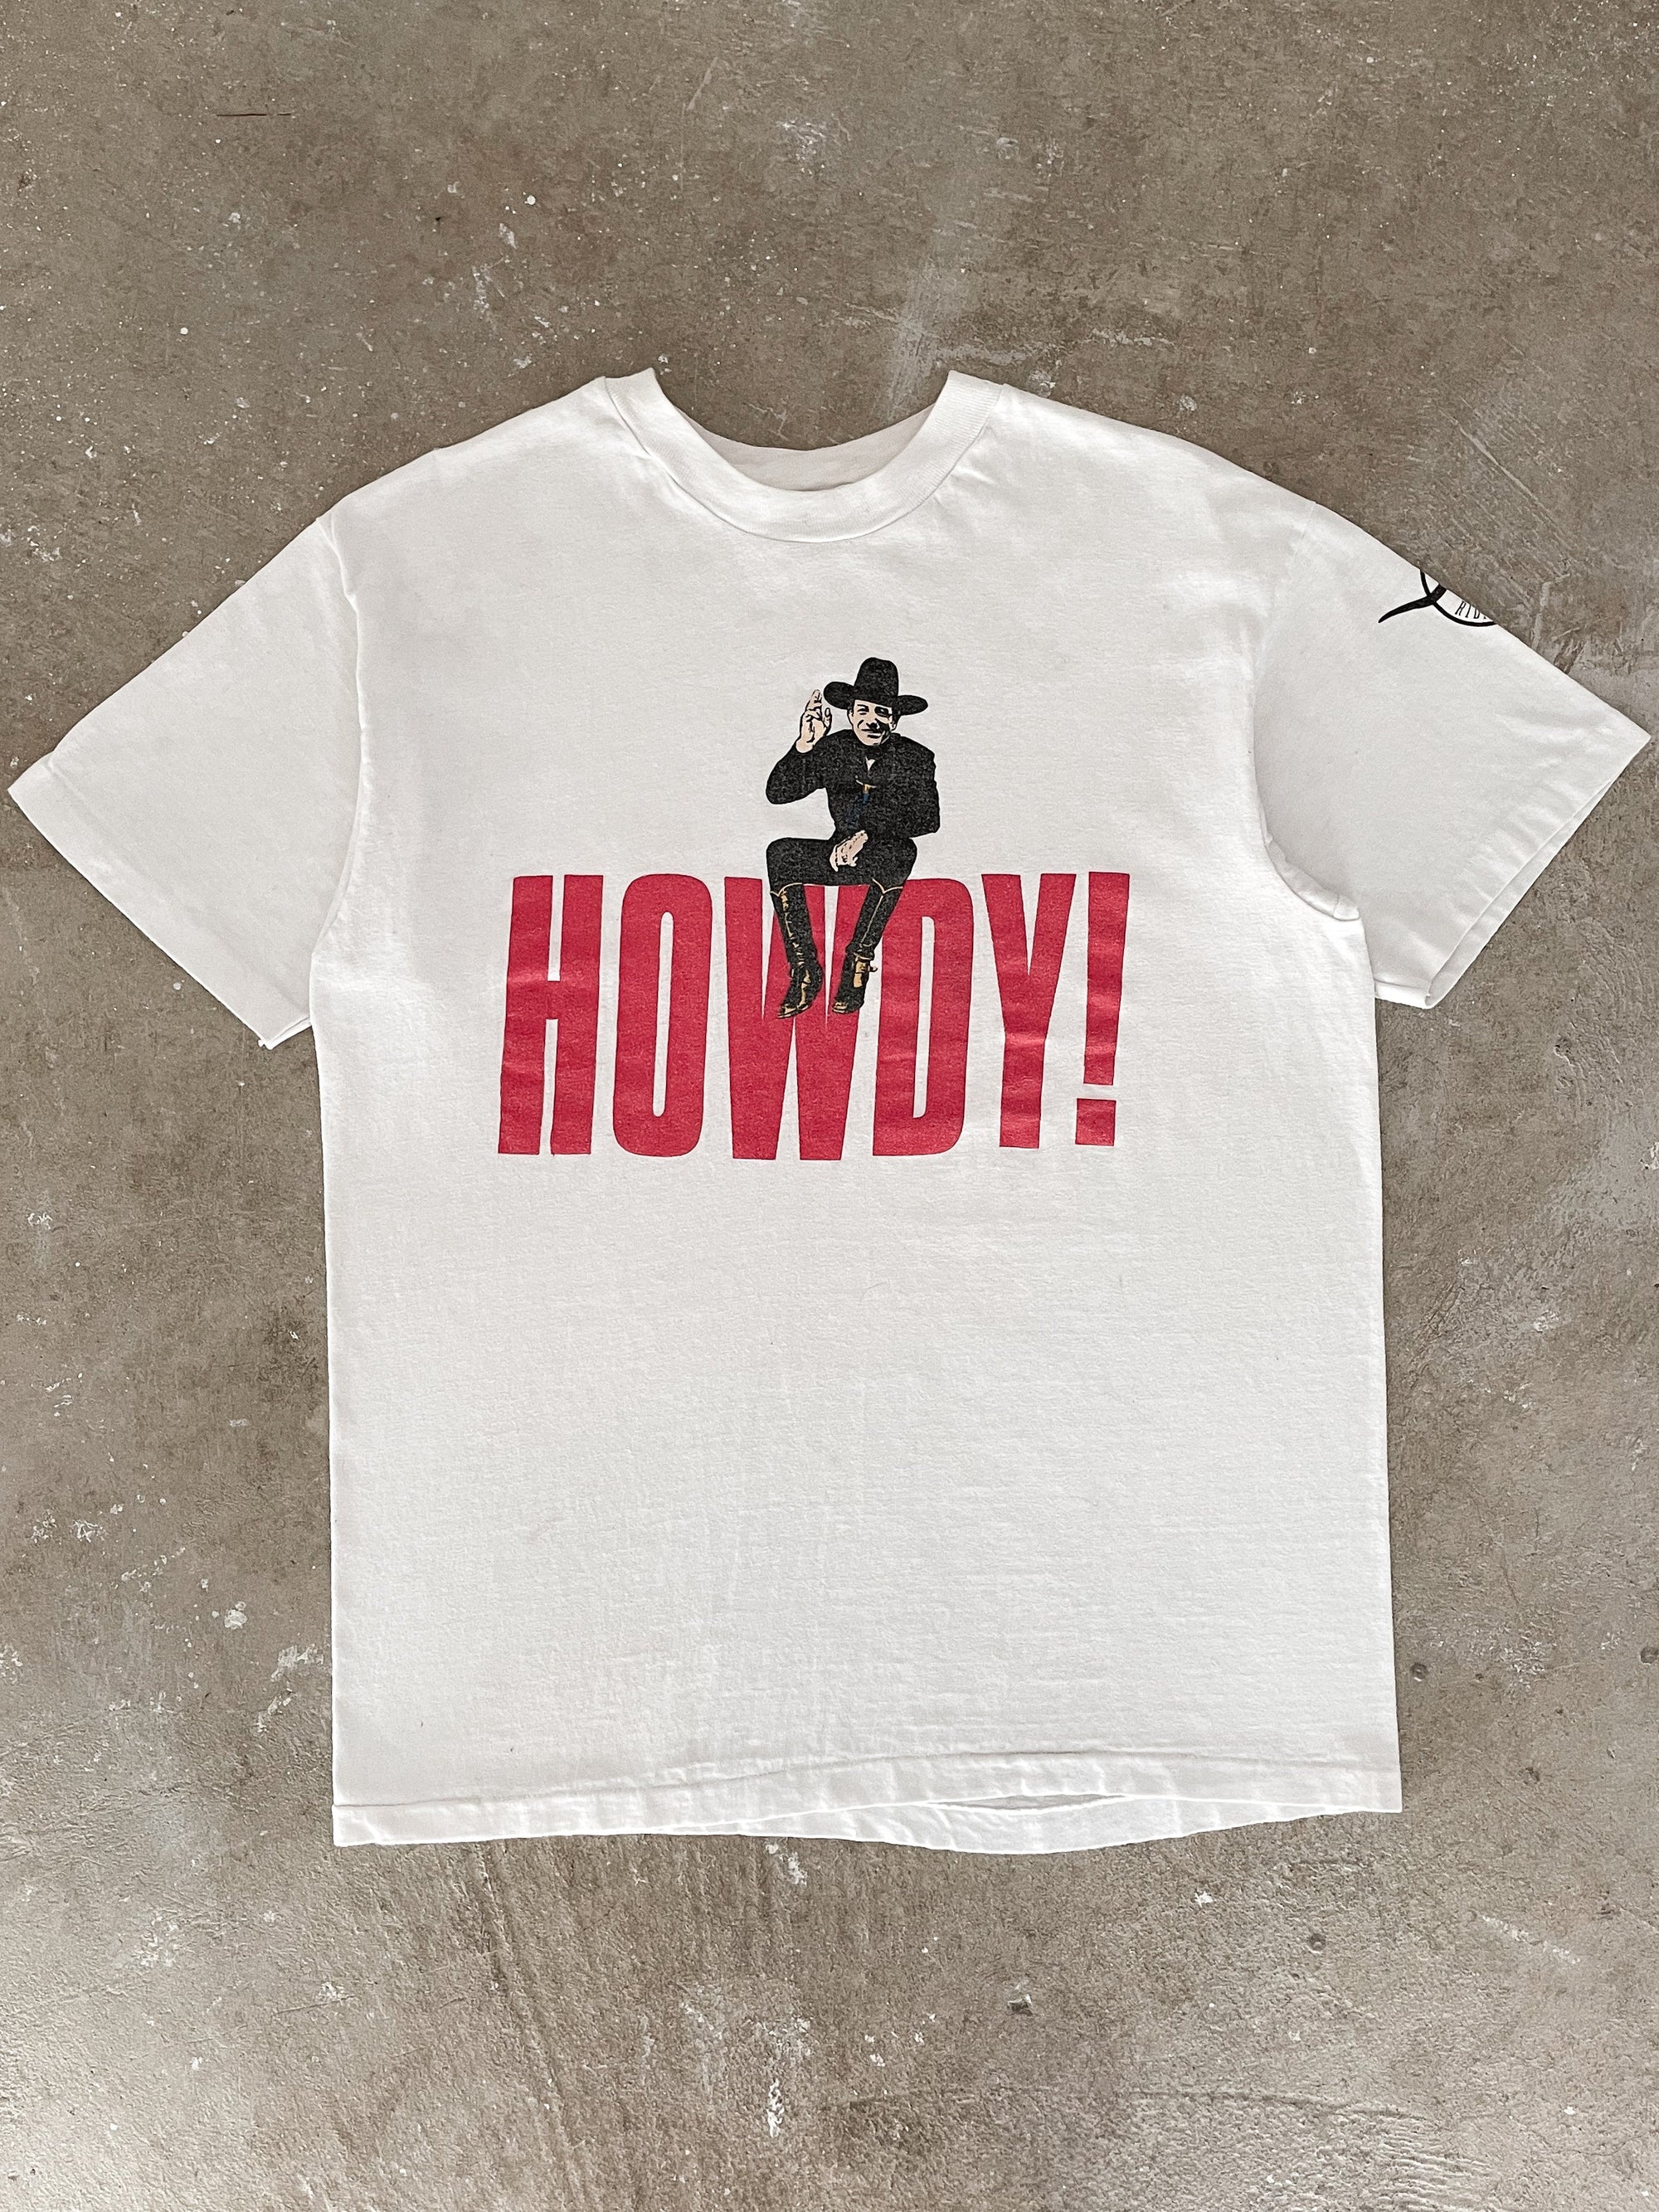 1990s “Howdy!” Single Stitched Tee (M/L)